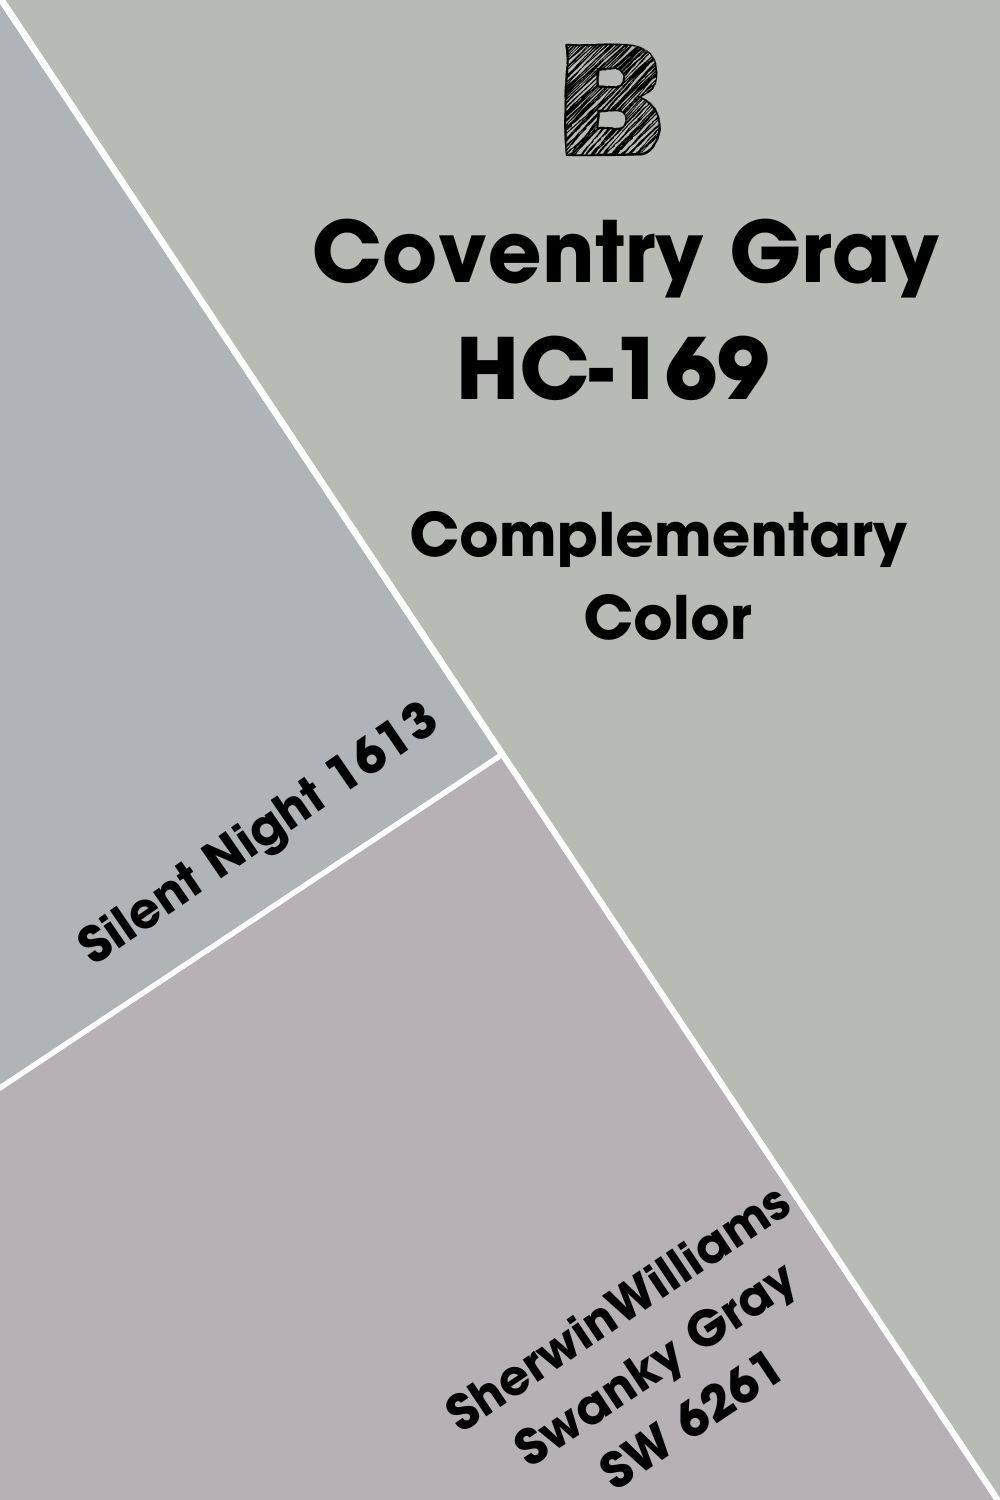 Complementary Color